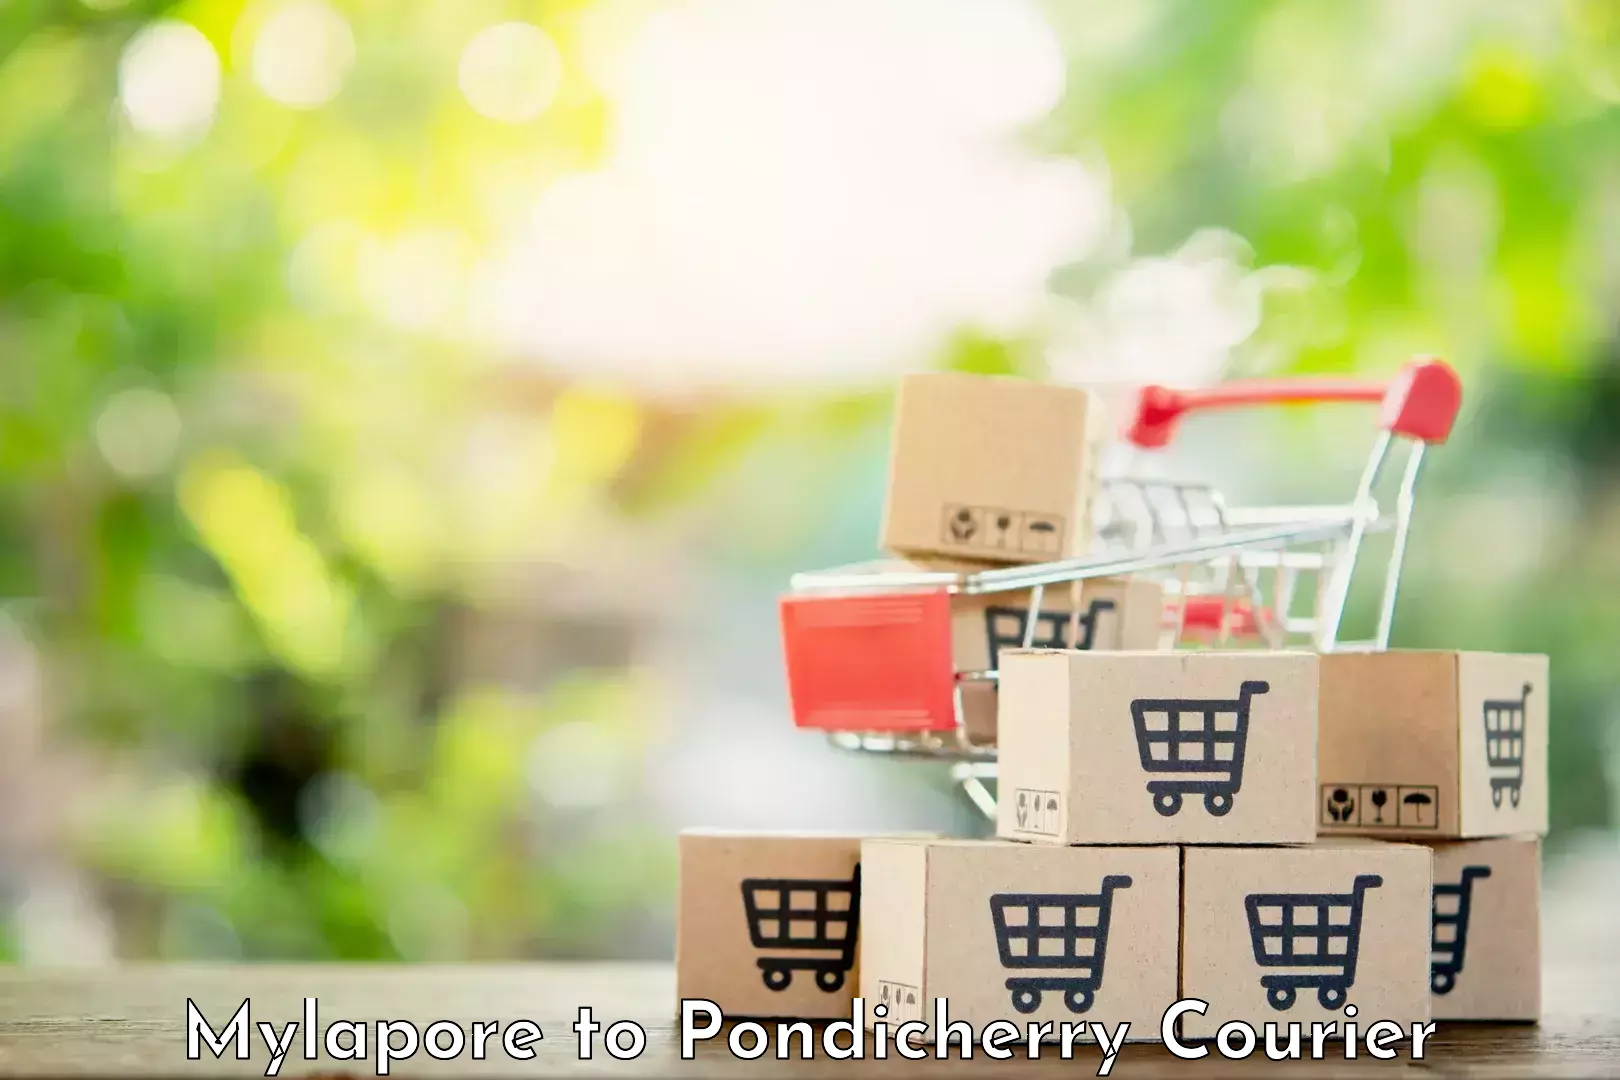 Subscription-based courier Mylapore to Pondicherry